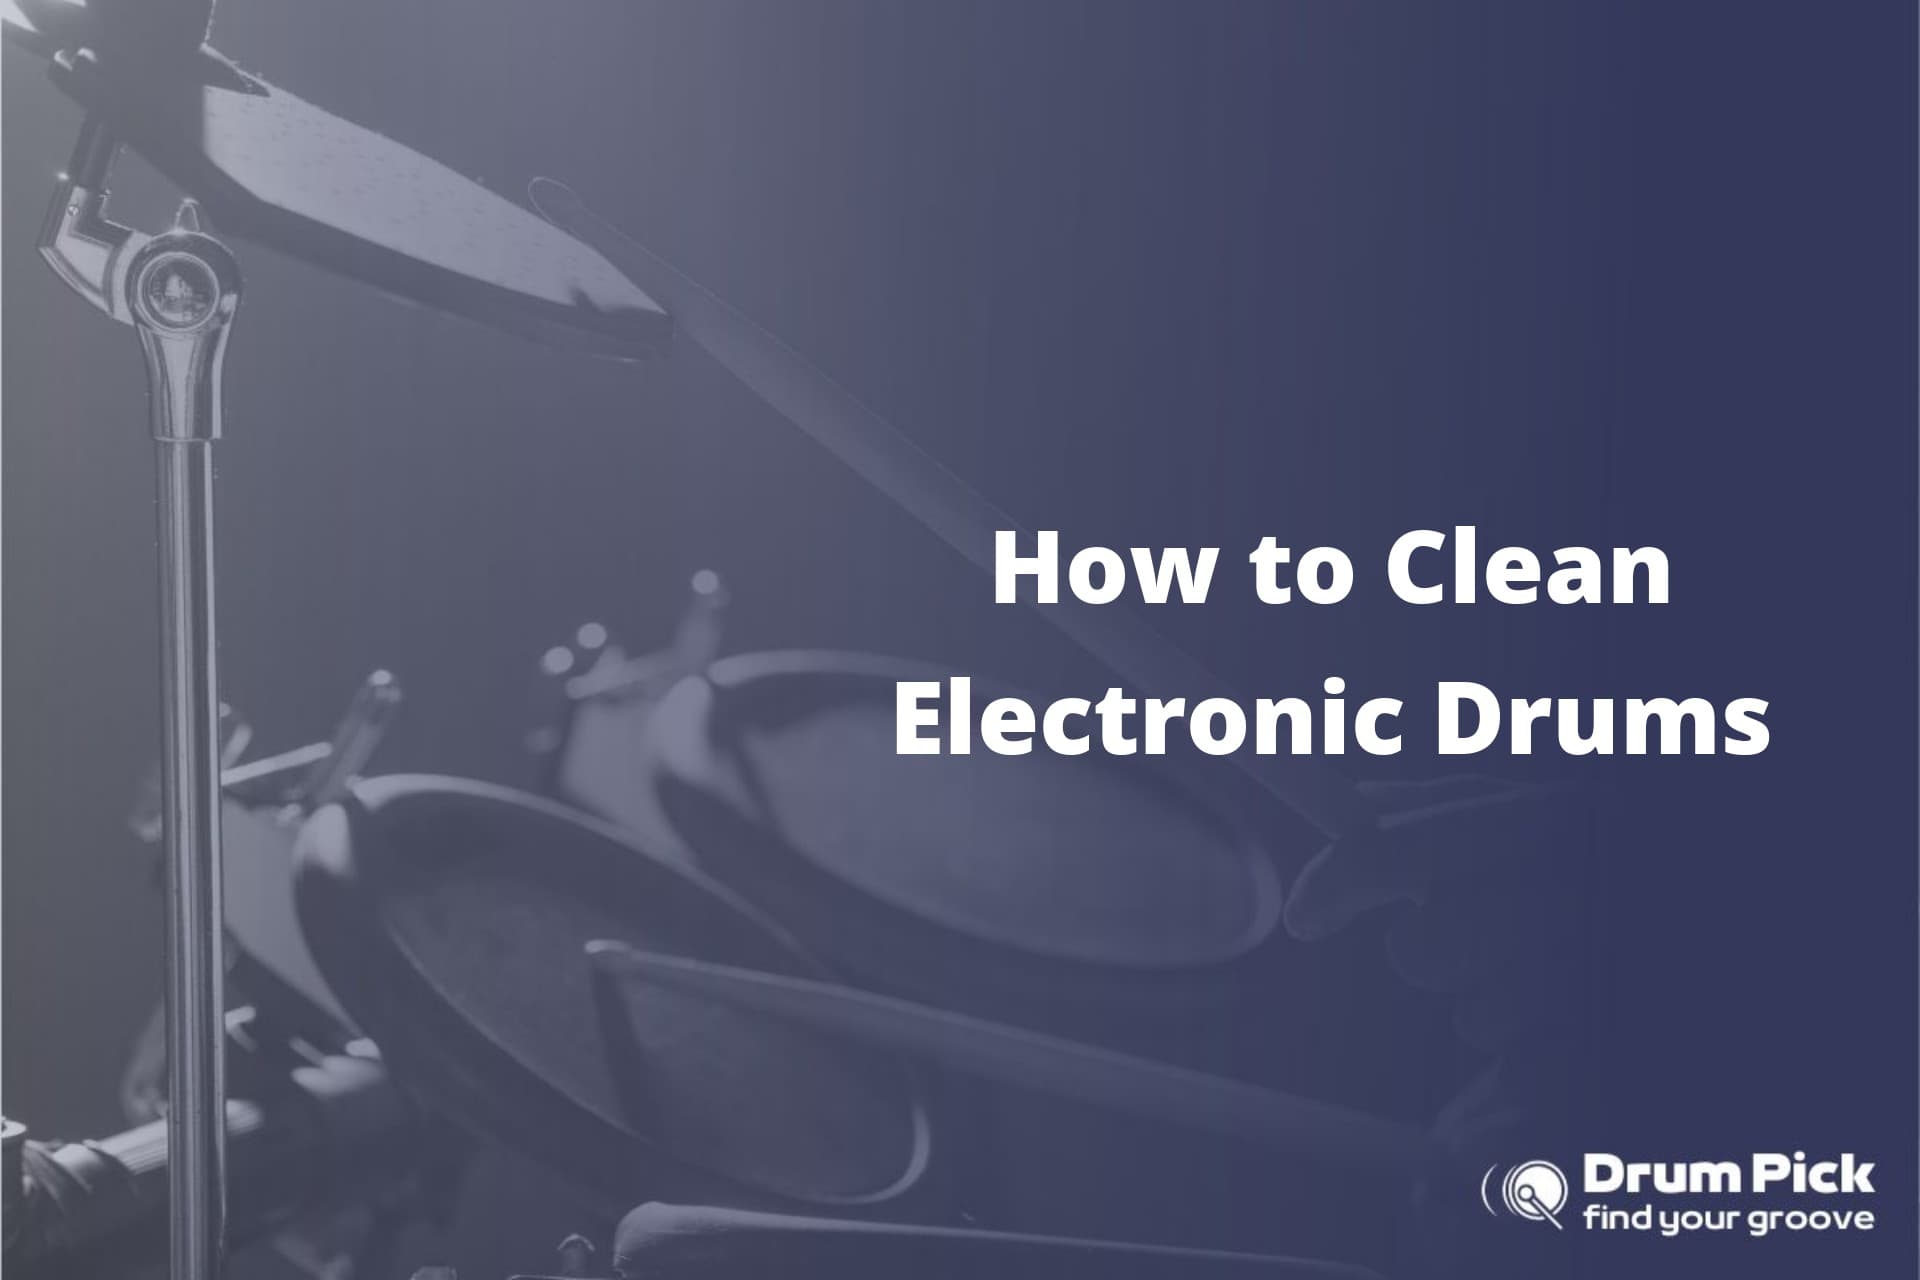 How to Clean Electronic Drums